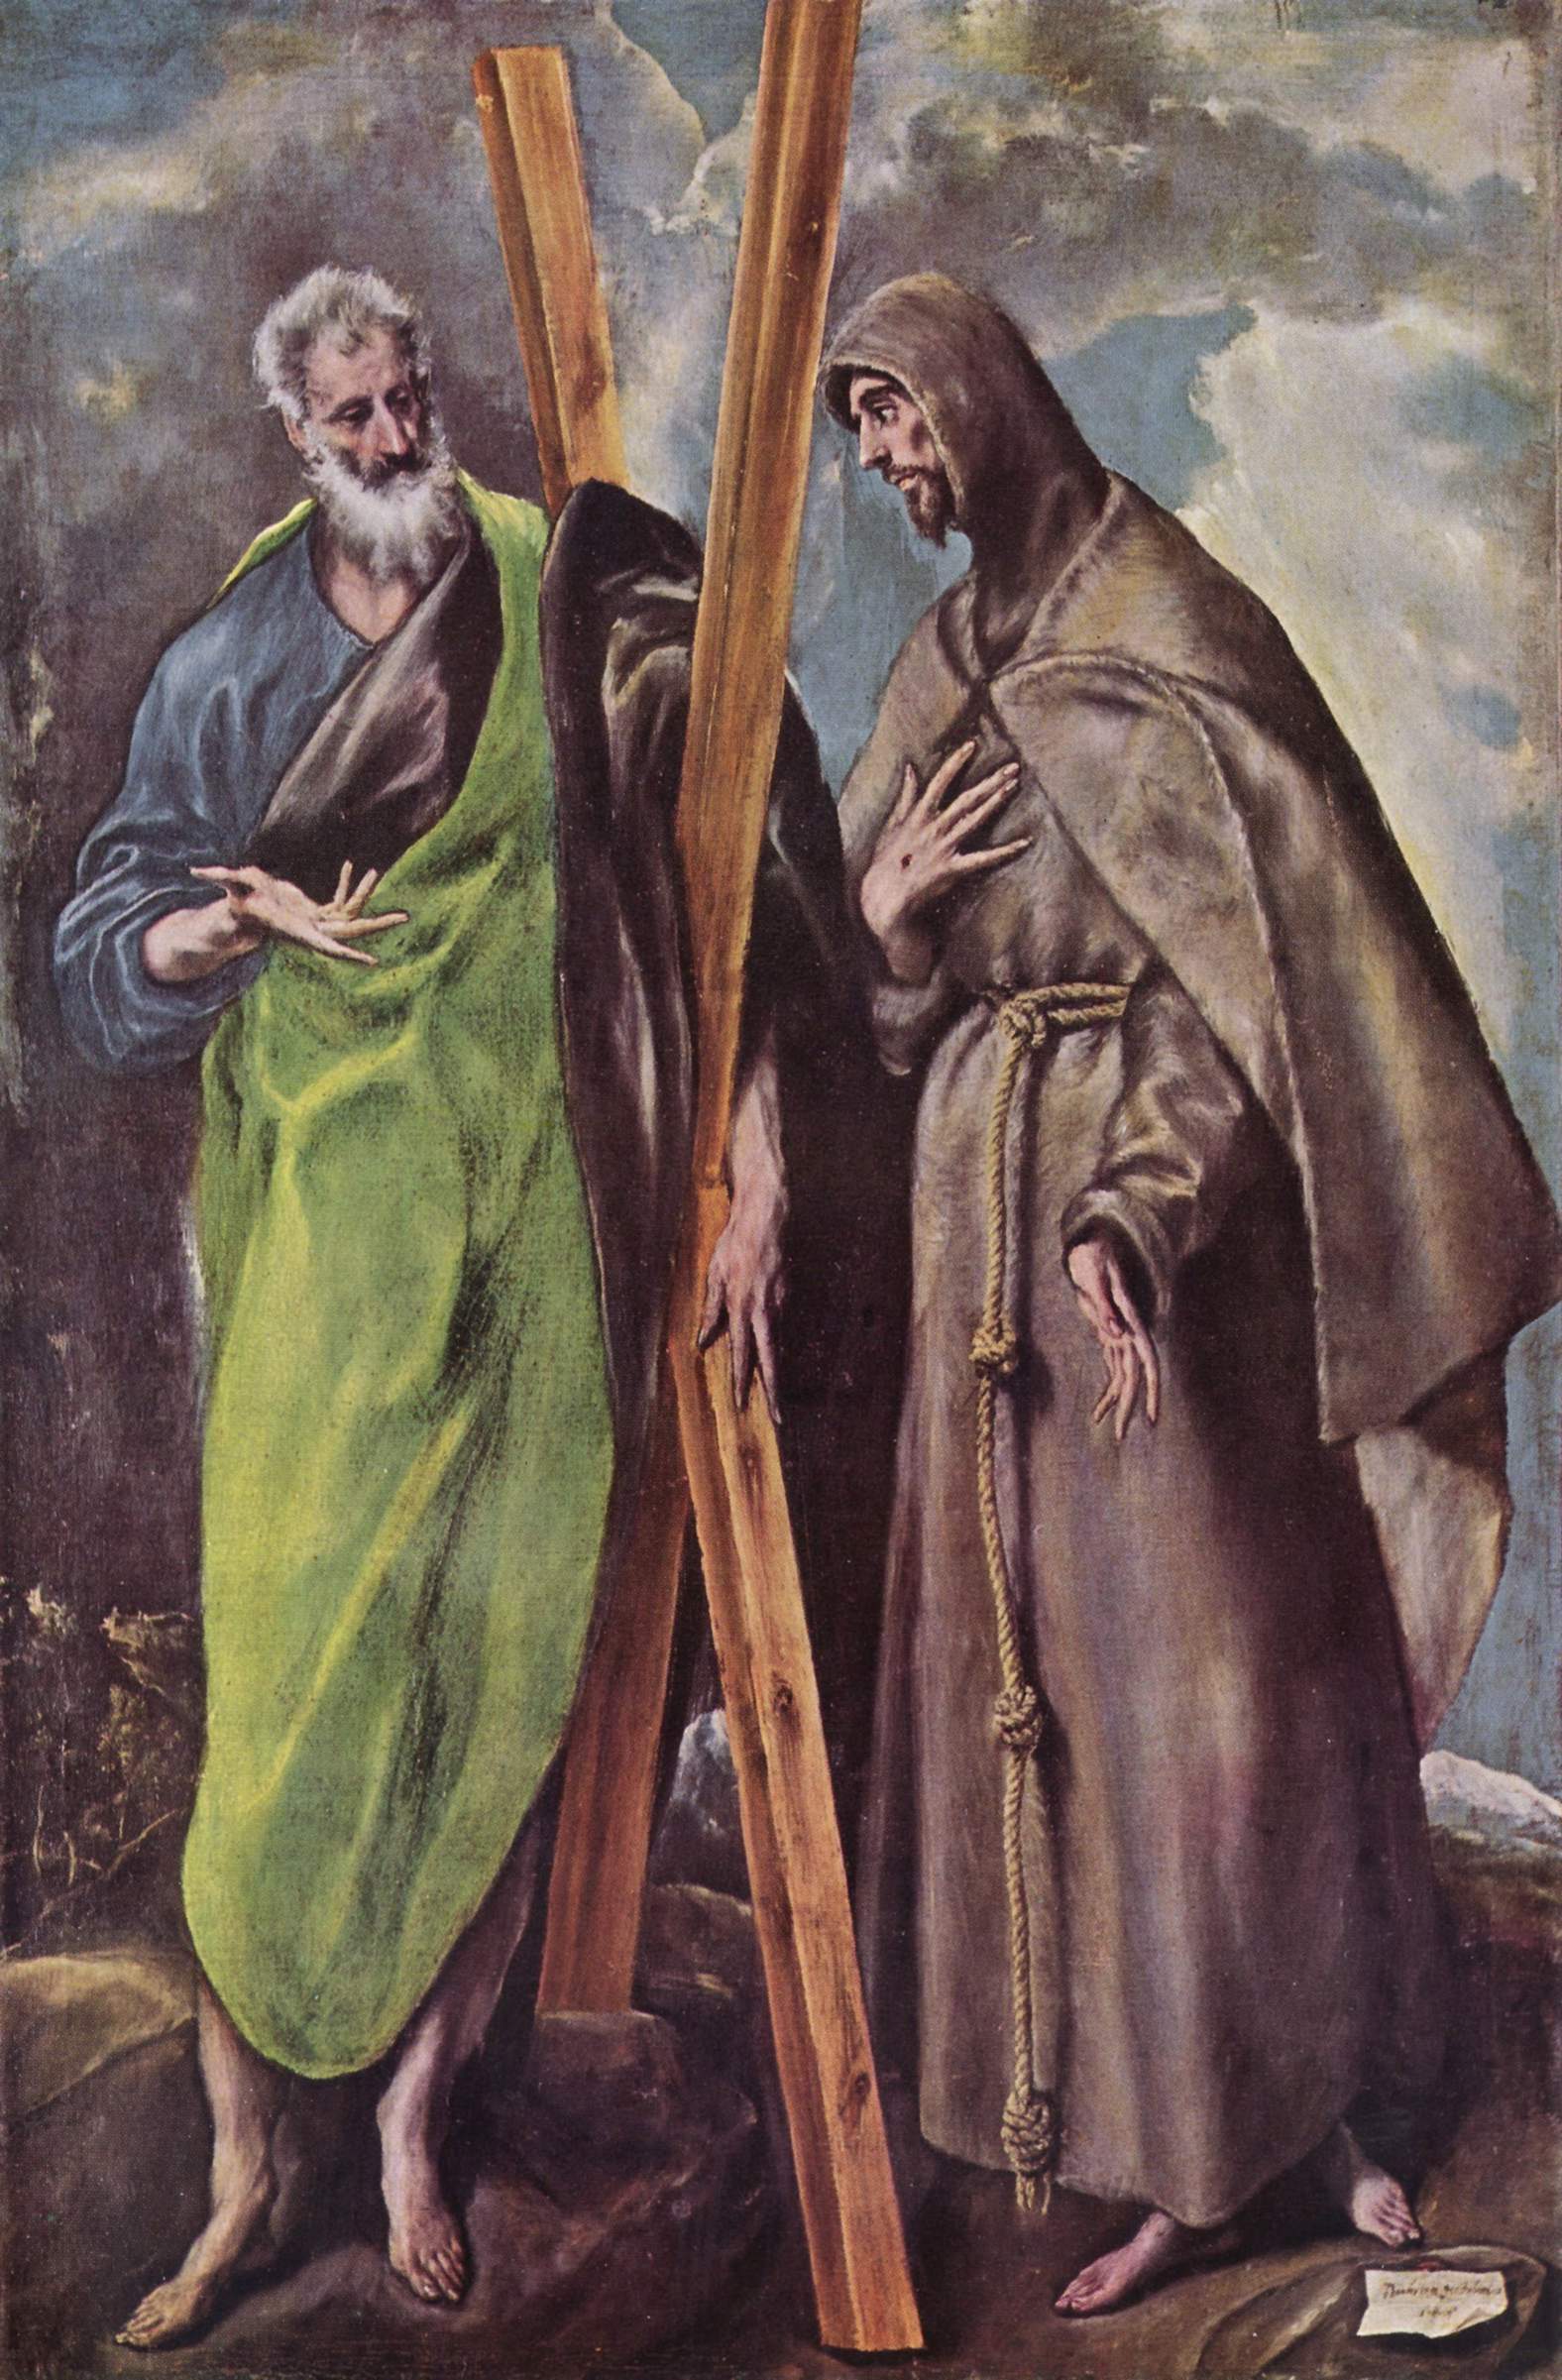 St. Andrew and St. Francis (1604).